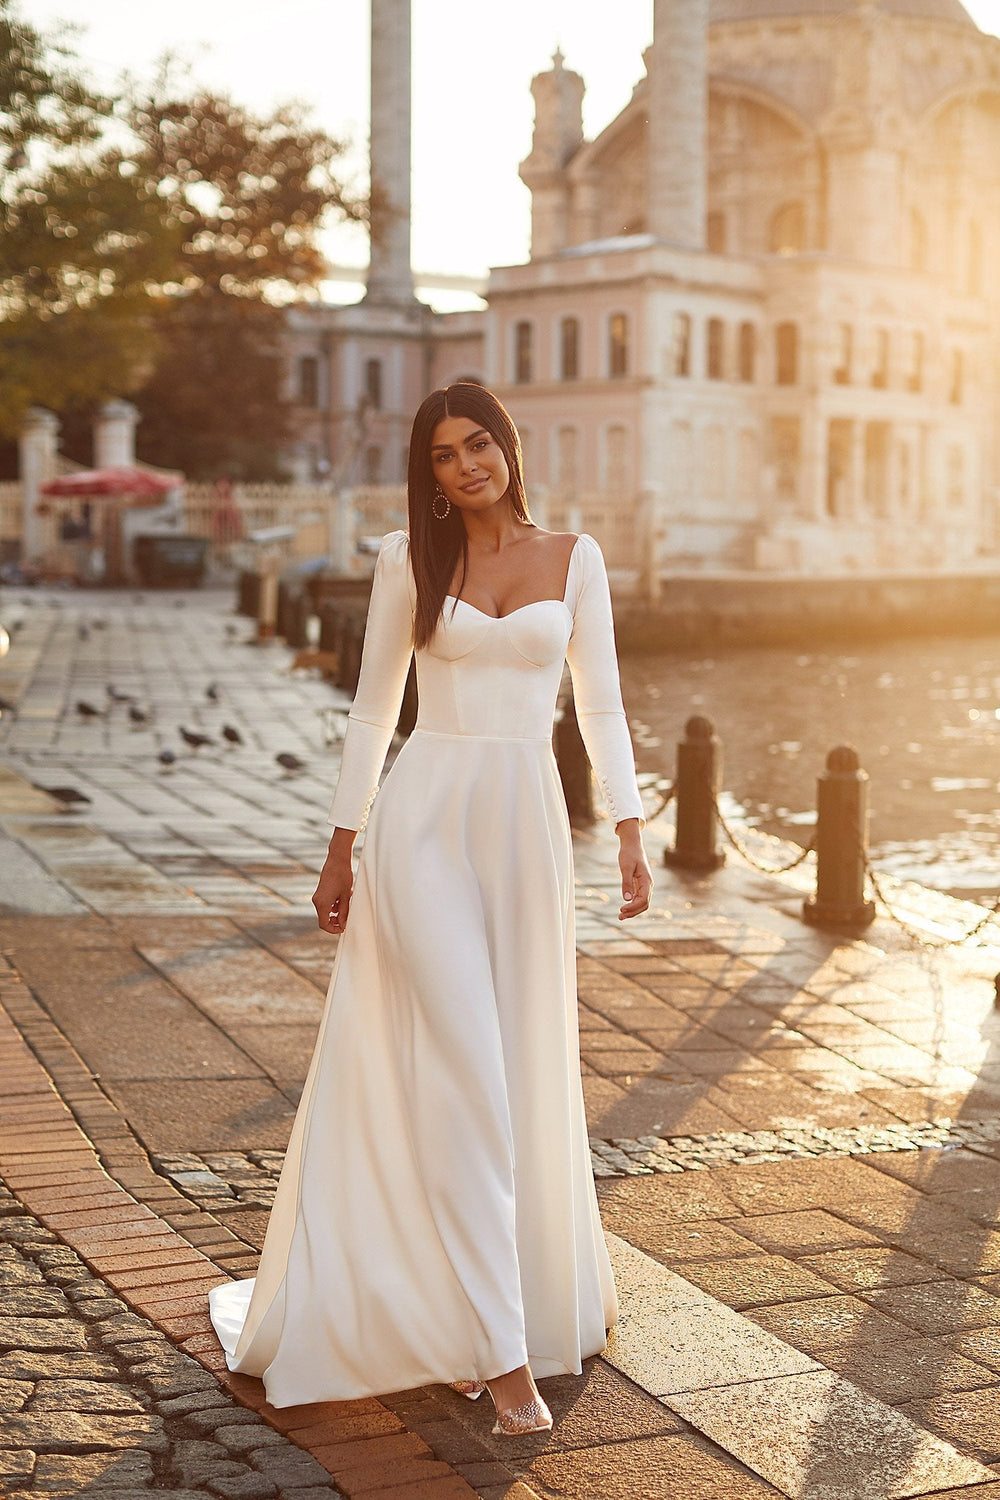 Lale Gown - Matte Satin Classic Bridal Gown with Long Sleeves